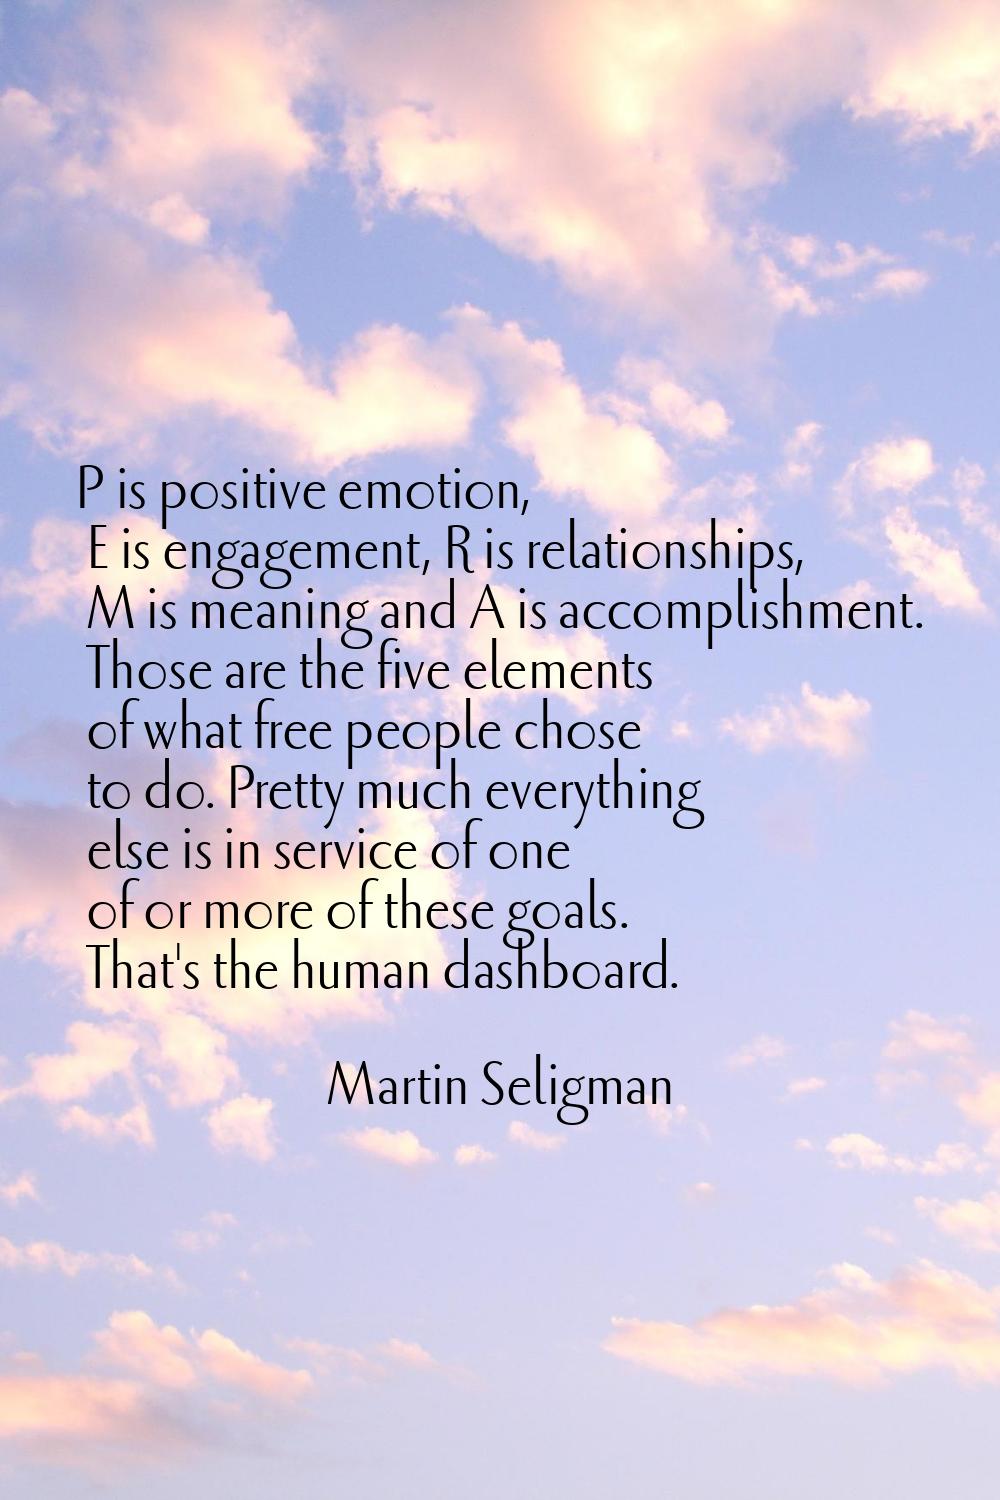 P is positive emotion, E is engagement, R is relationships, M is meaning and A is accomplishment. T